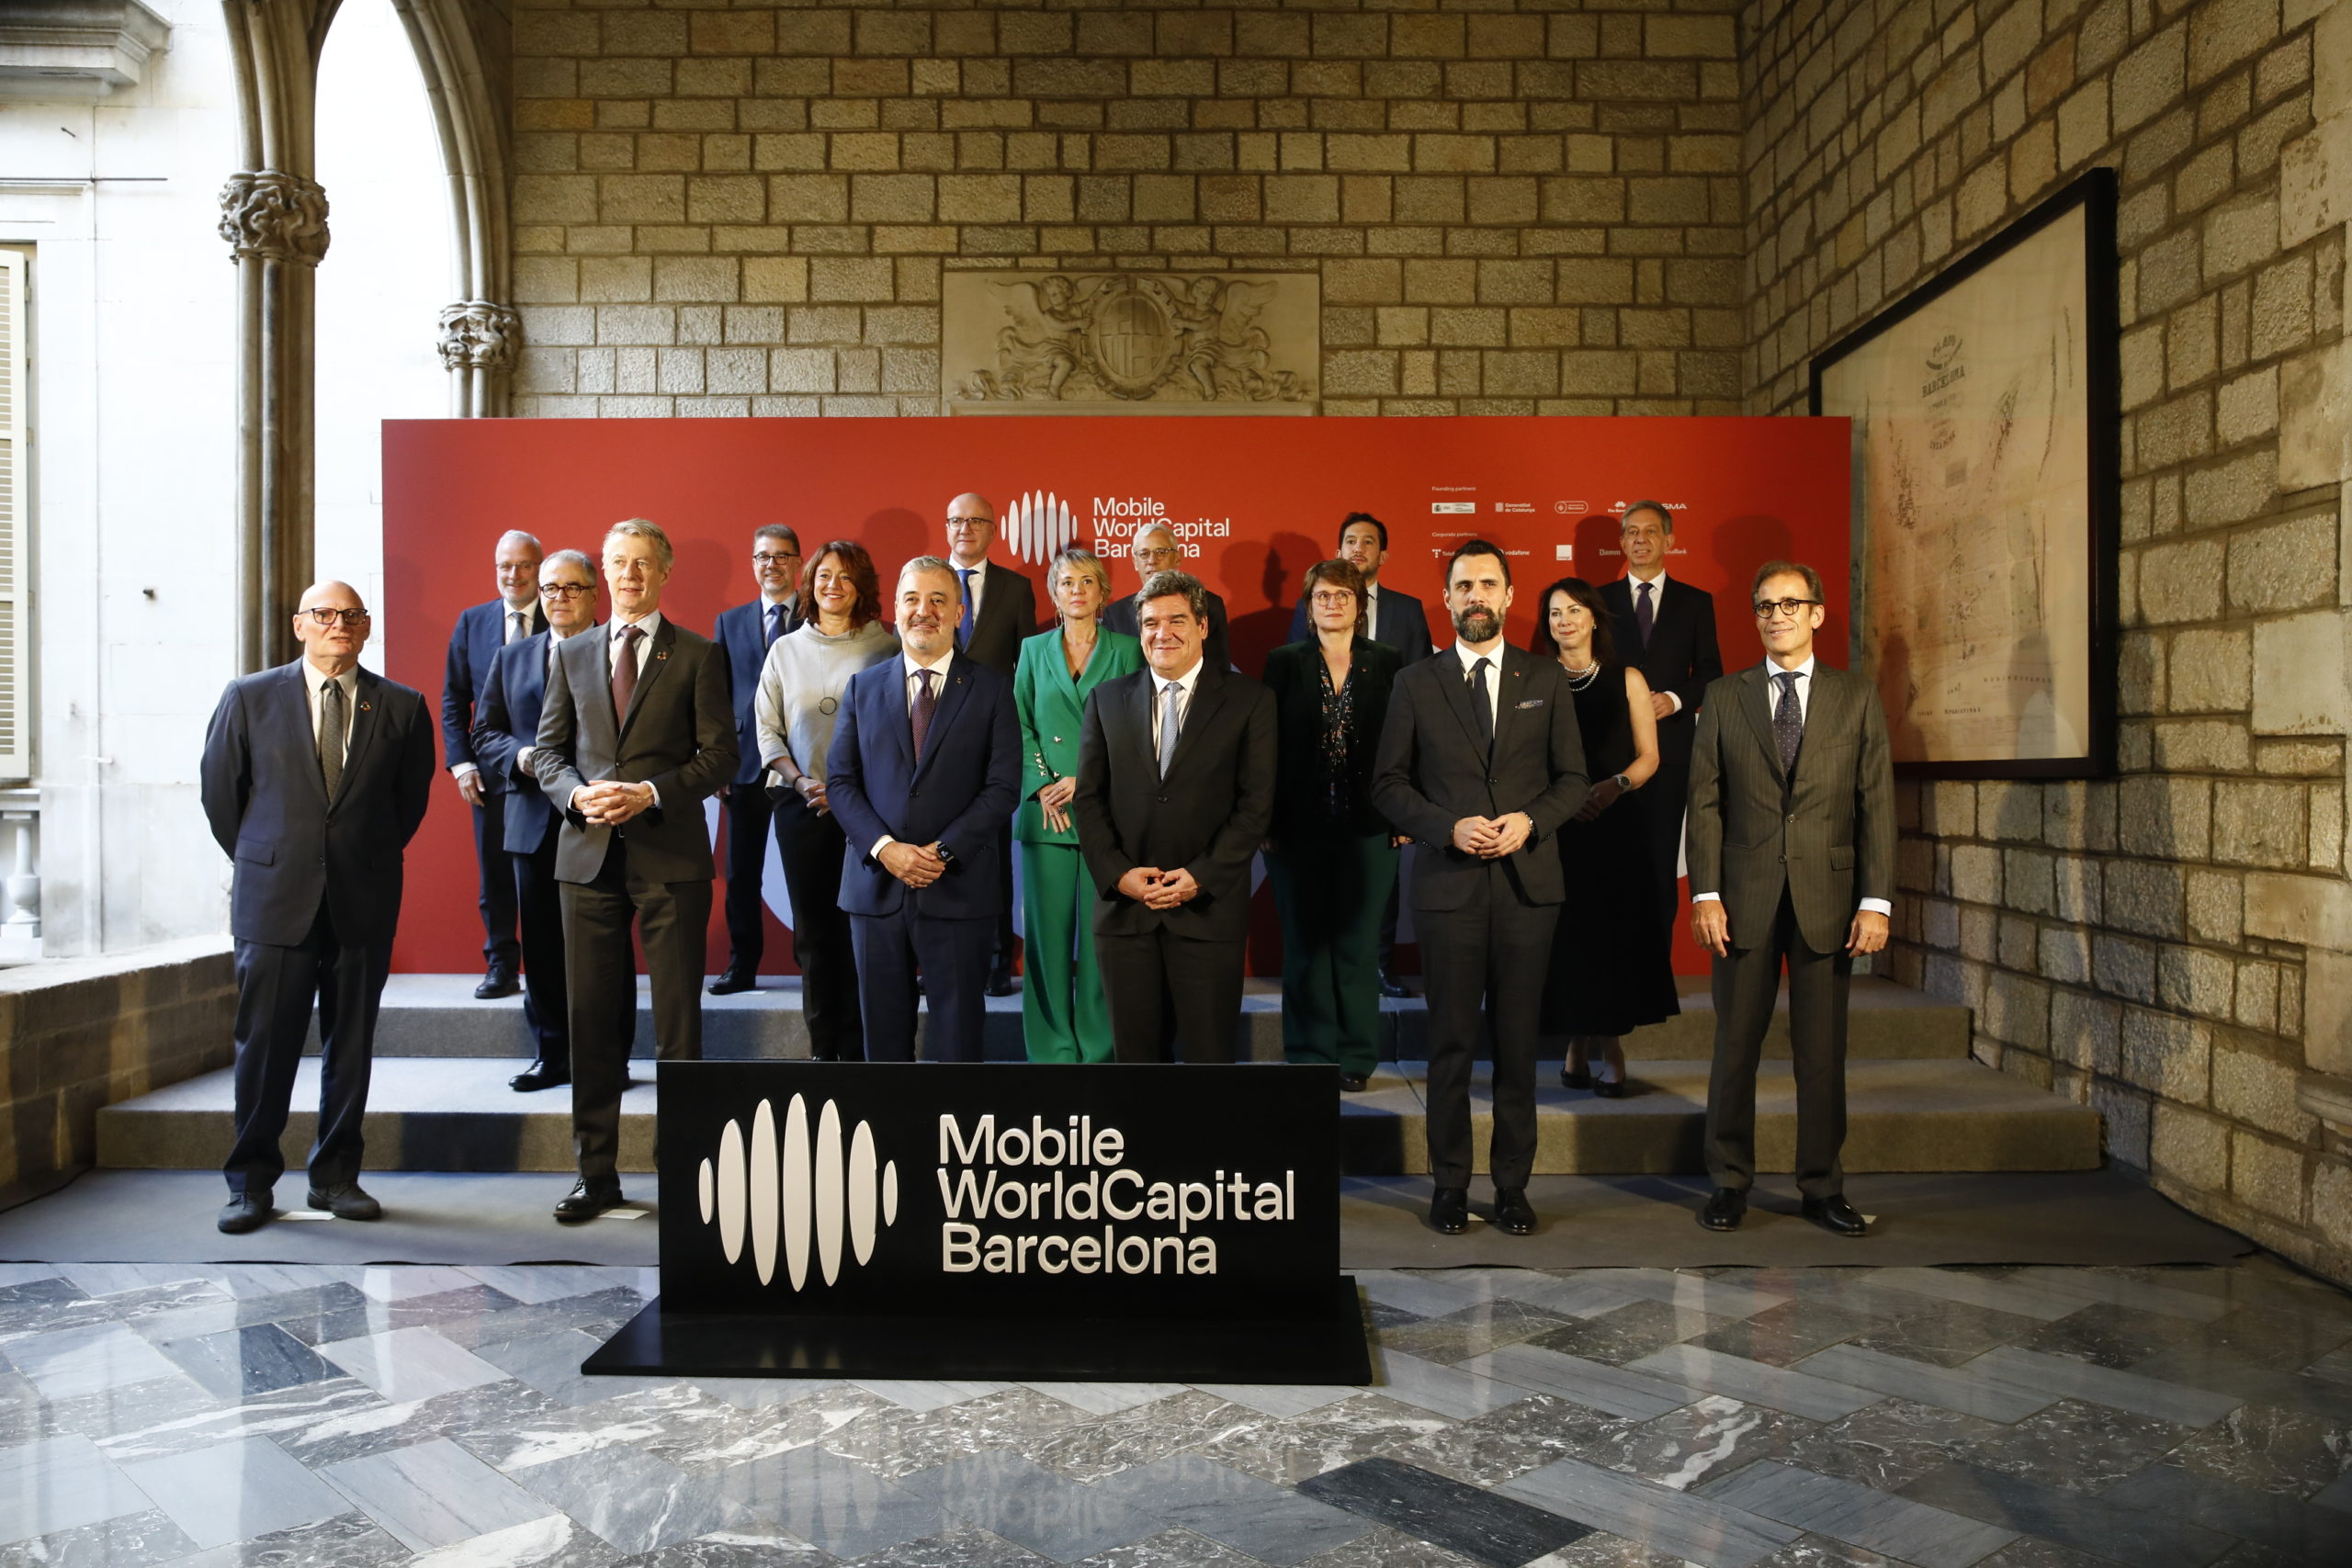 Mobile World Capital Barcelona launches international awards to recognise the best sustainable digitalisation projects